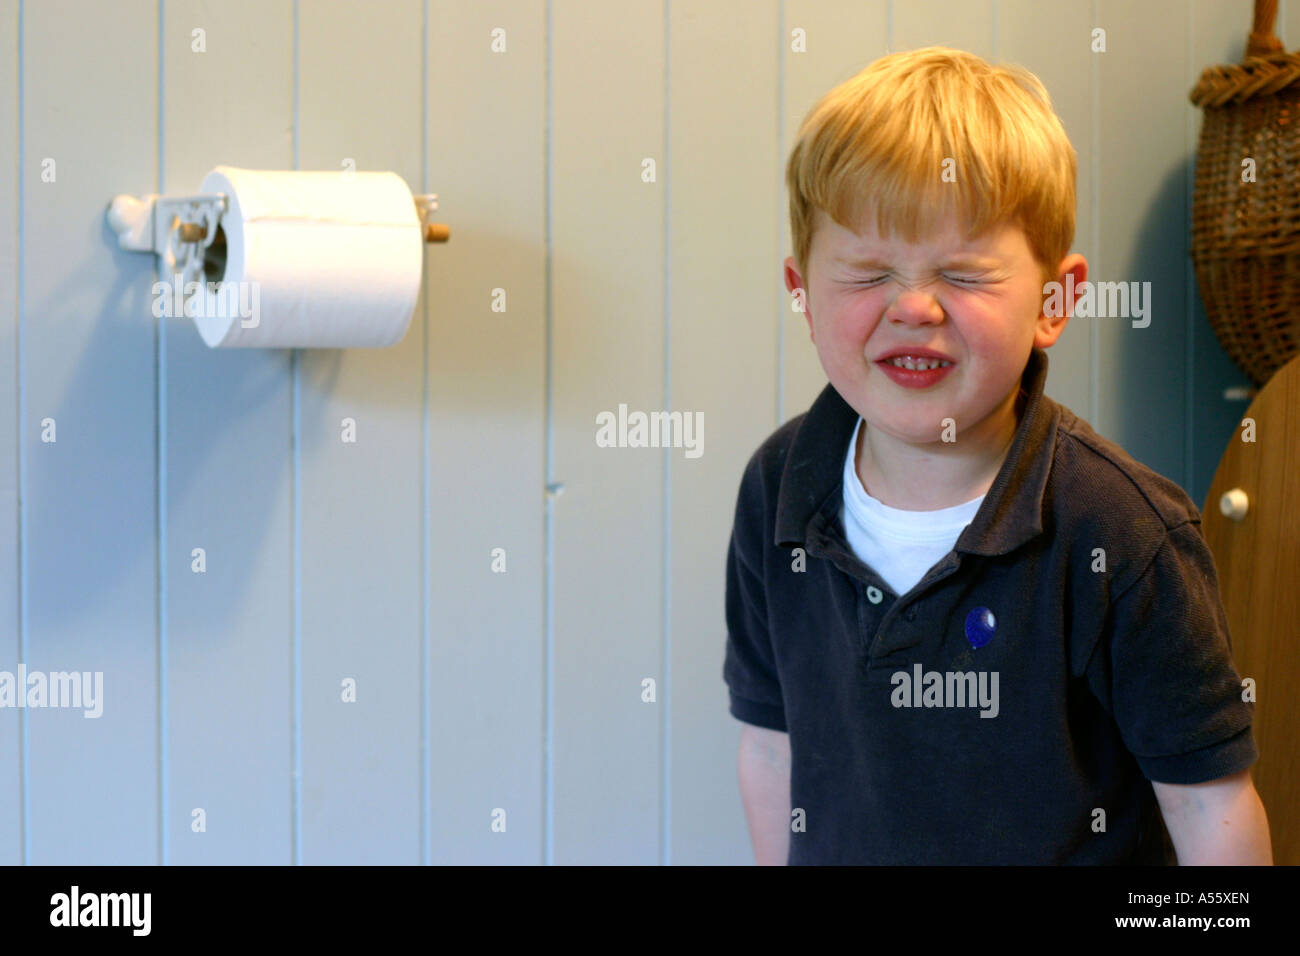 four year old boy pulling a face sitting on toilet Stock Photo